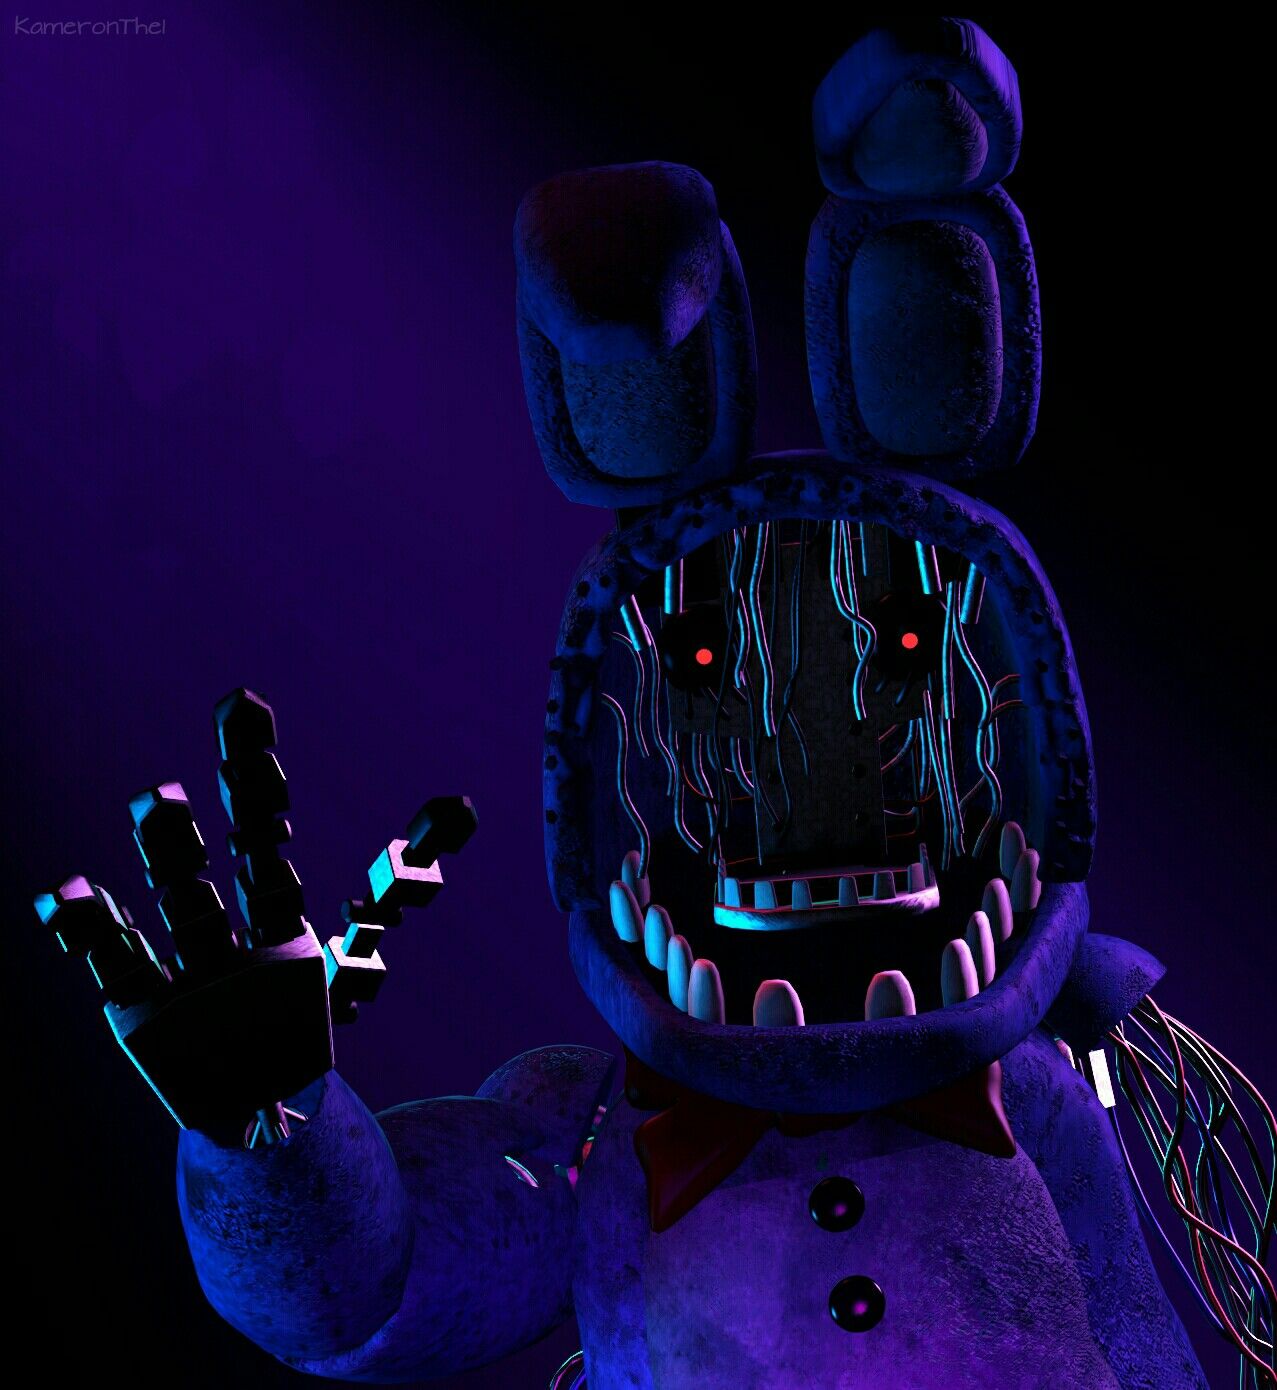 20 Bonnie Five Nights at Freddys HD Wallpapers and Backgrounds